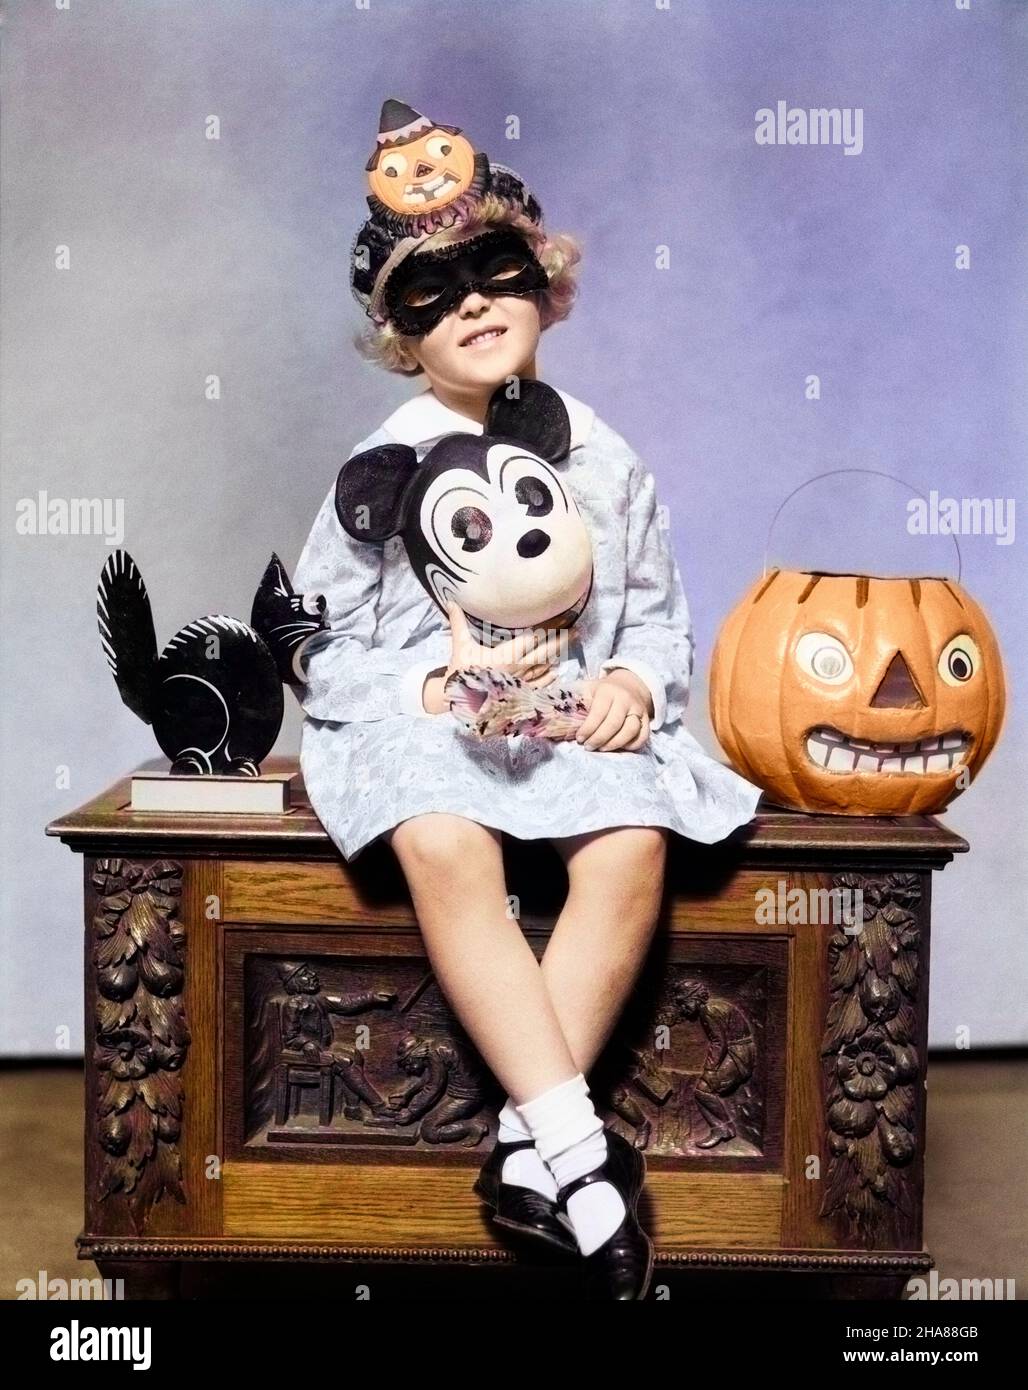 1930s LITTLE GIRL HOLDING MICKEY MOUSE TOY WEARING MASK CLOWN HAT LOOKING AT CAMERA SITTING BESIDE BLACK CAT HALLOWEEN PUMPKIN - h4264c HAR001 HARS STUDIO SHOT MASKS HEALTHINESS HOME LIFE COPY SPACE HALF-LENGTH AMERICANA EYE CONTACT HAPPINESS EXCITEMENT POSING MOUSE BESIDE ANONYMOUS OCTOBER JUVENILES MARY JANE SHOES MASKED MICKEY MICKEY MOUSE POSE CAUCASIAN ETHNICITY HAR001 OLD FASHIONED Stock Photo